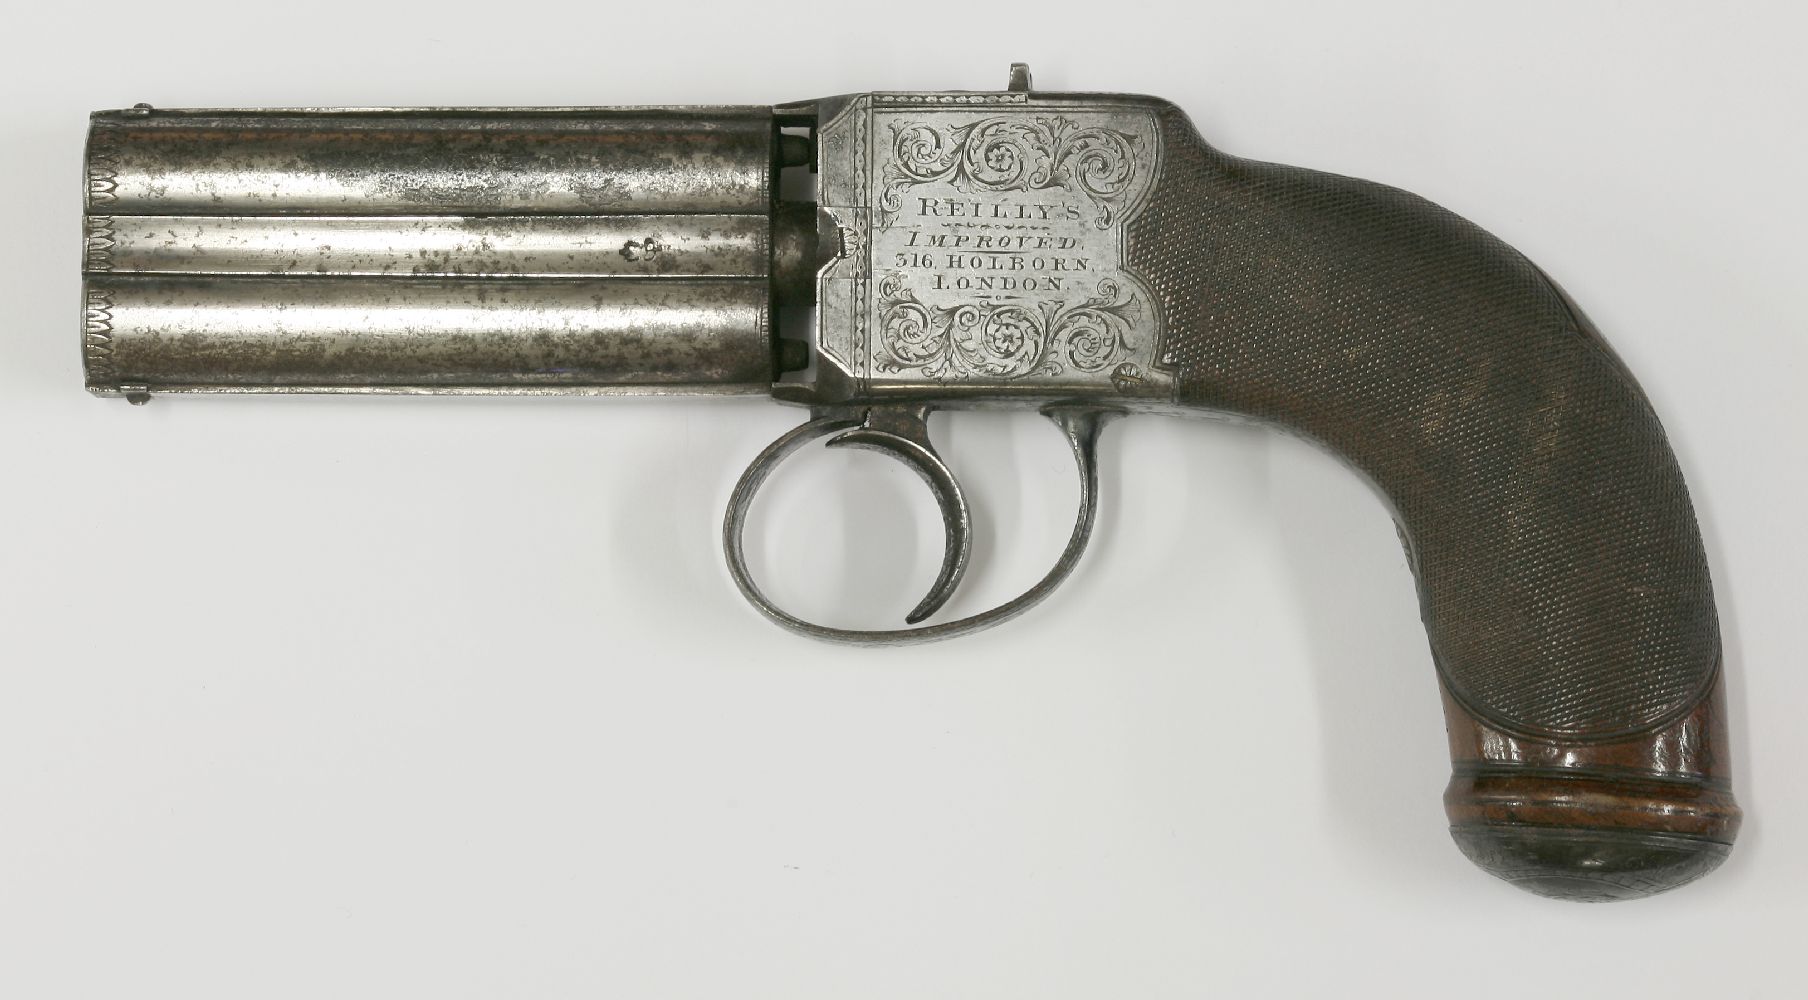 A Reilly's improved turn-over pistol,c.1850, the barrel ends engraved with leaves and with proof